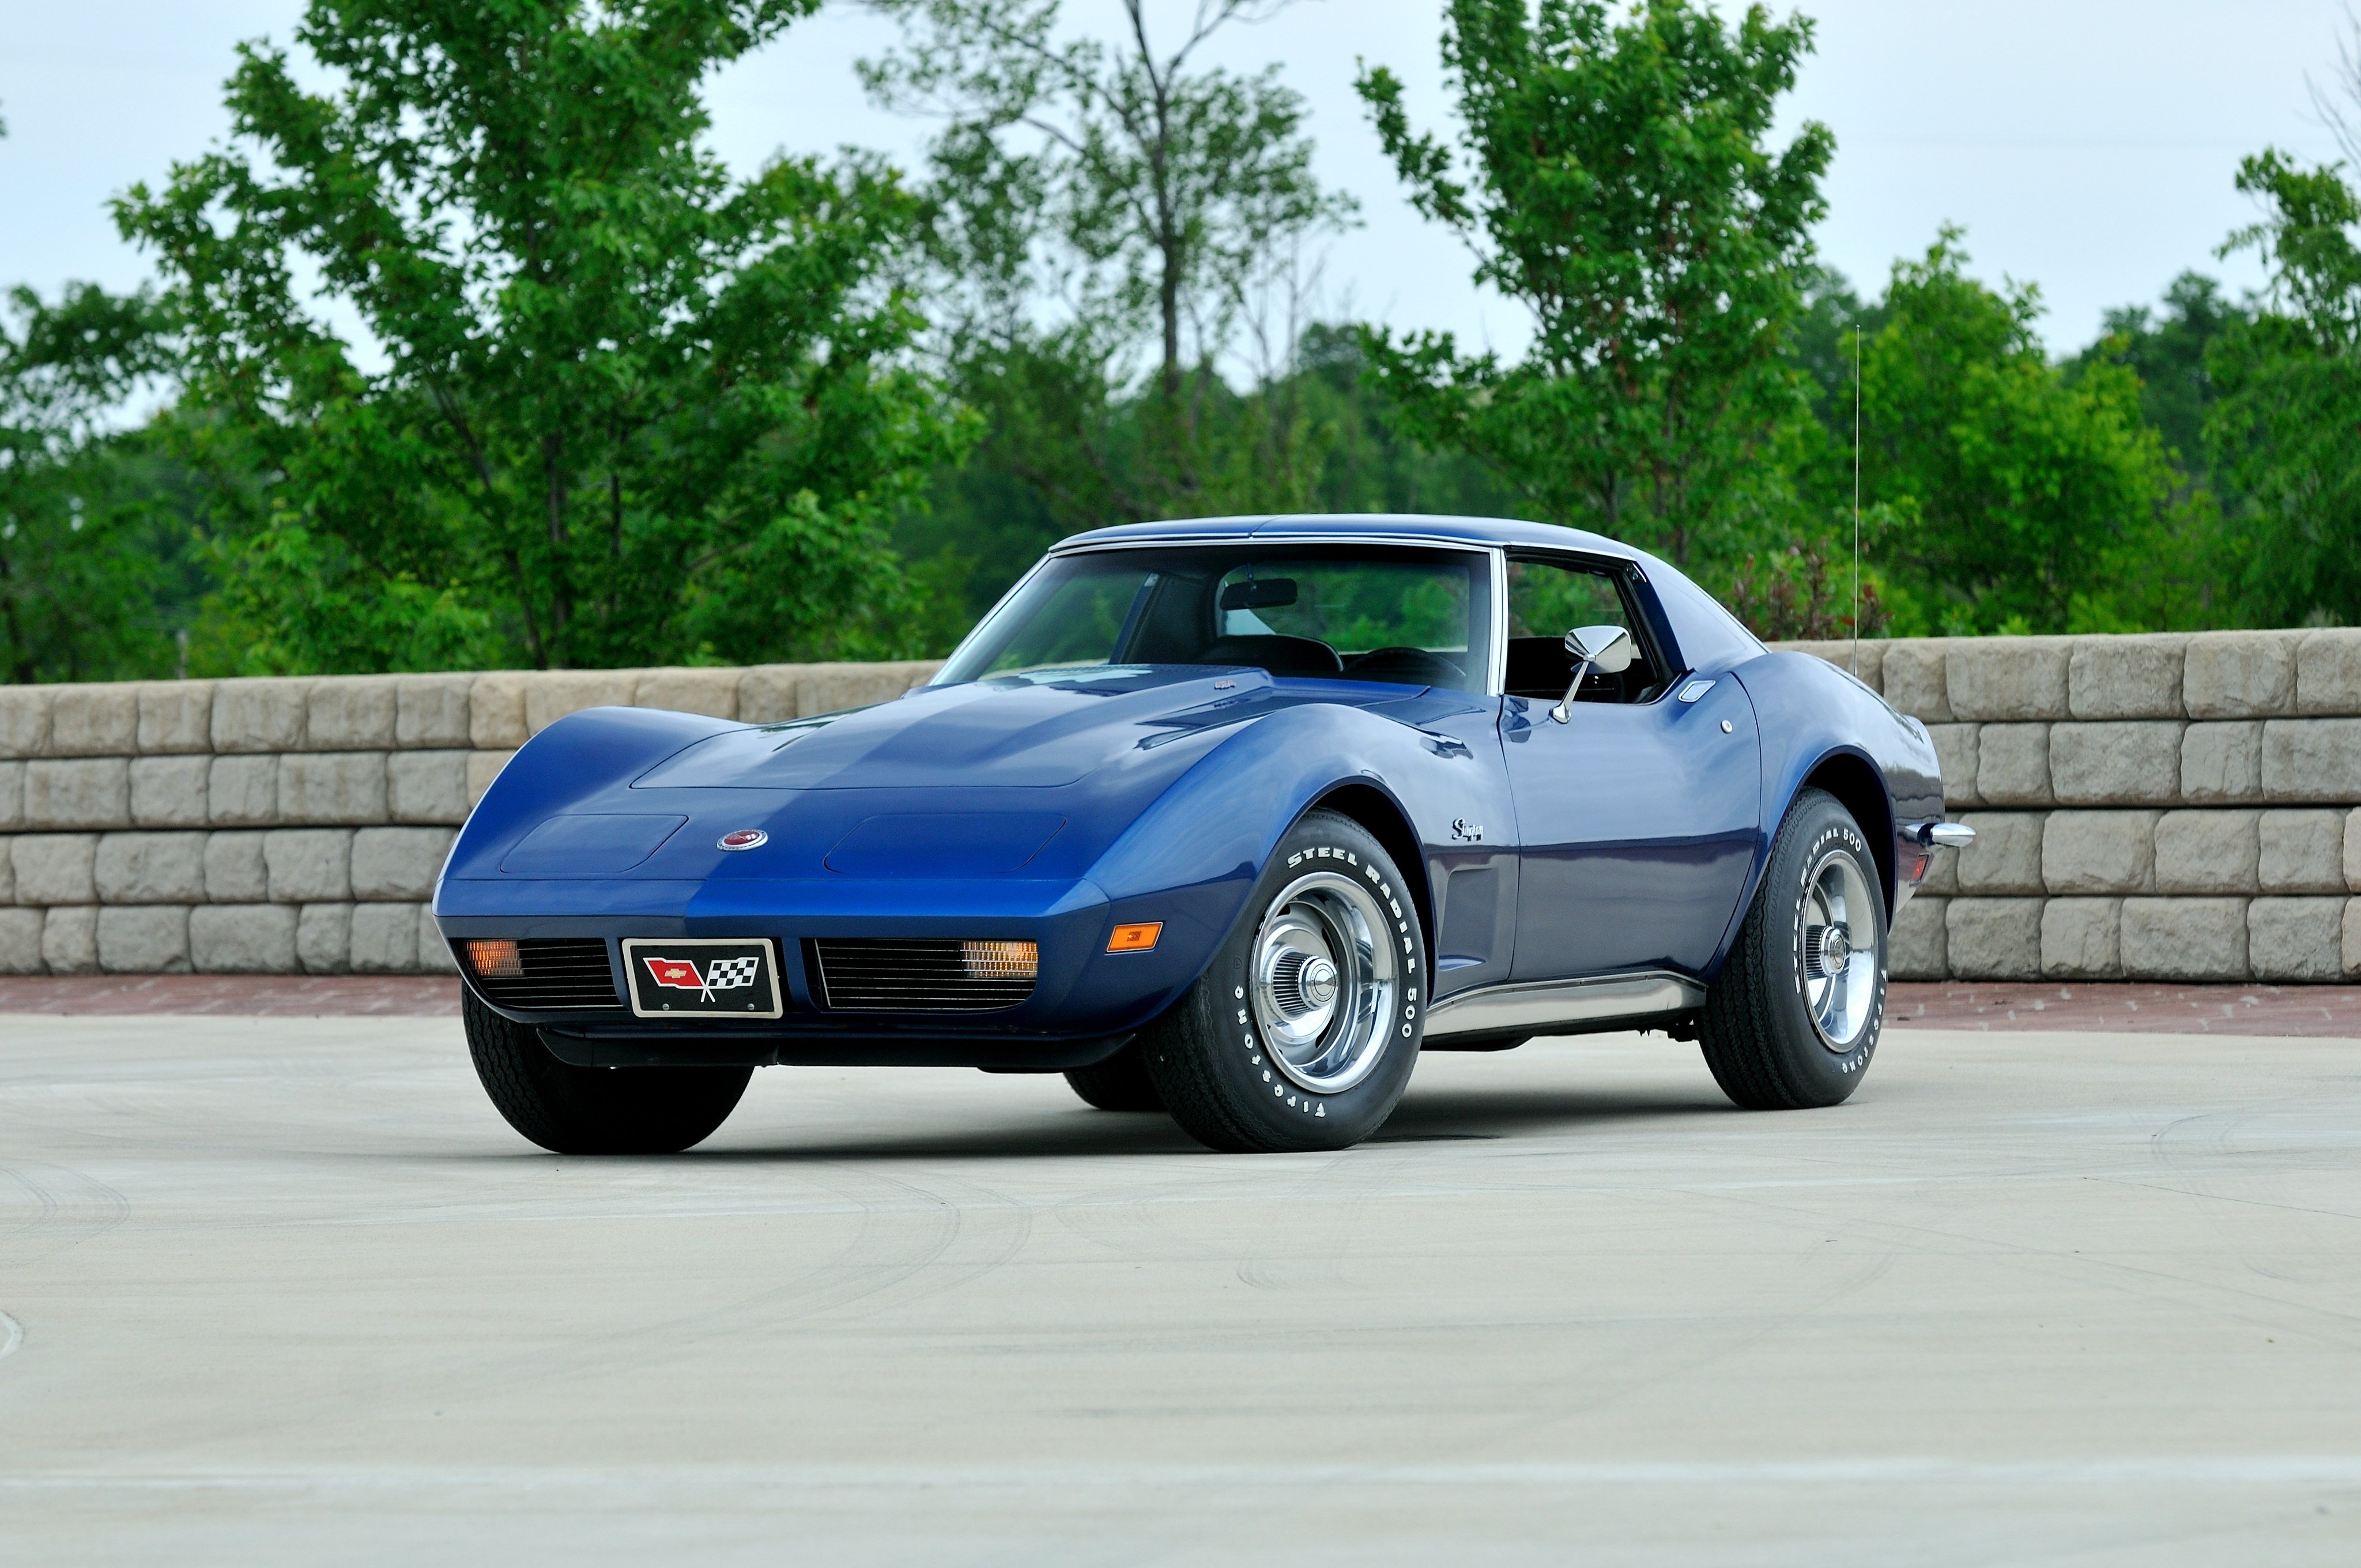 1973, Chevrolet, Corvette, Stingray, Ls4, 454, Sport, Coupe, Muscle, Classic, Supercar, Sting, Ray Wallpaper